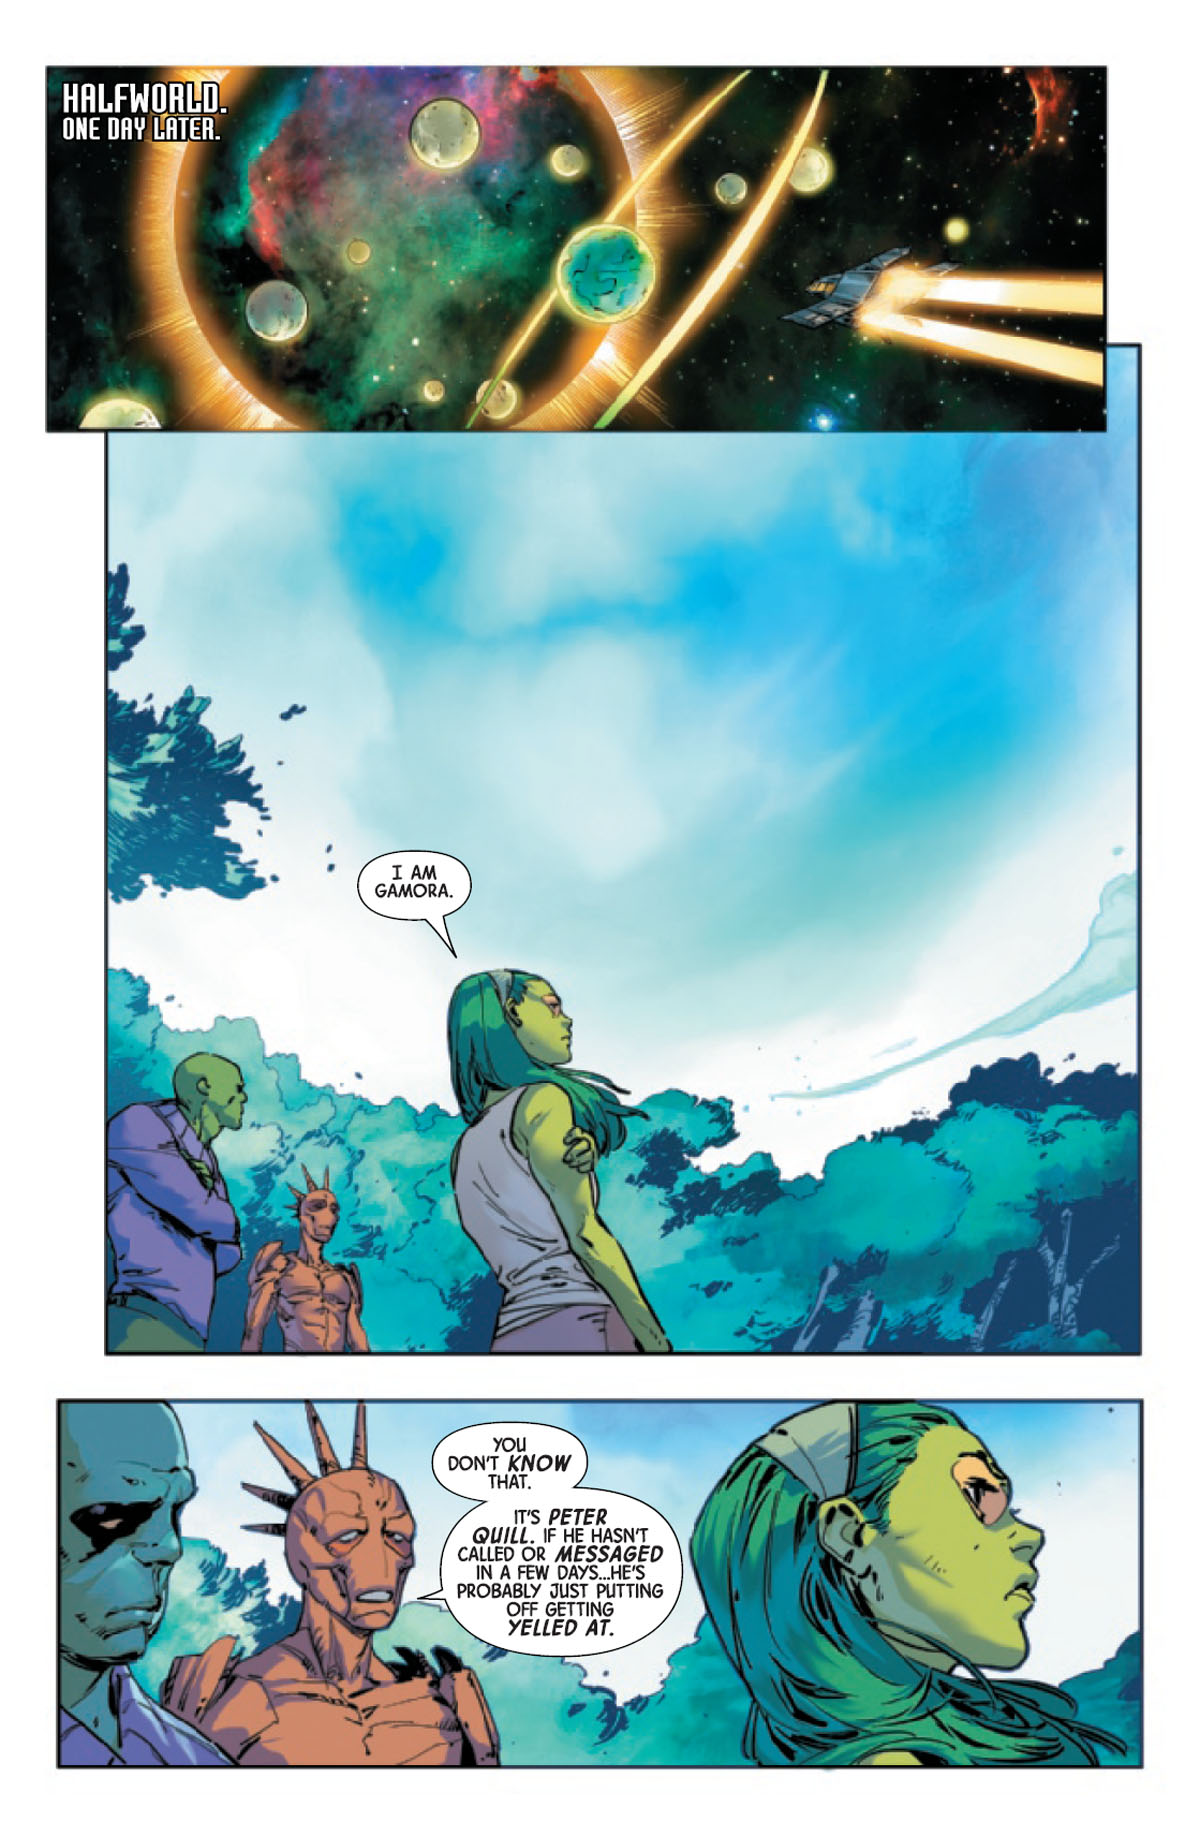 Guardians of the Galaxy #3 page 1